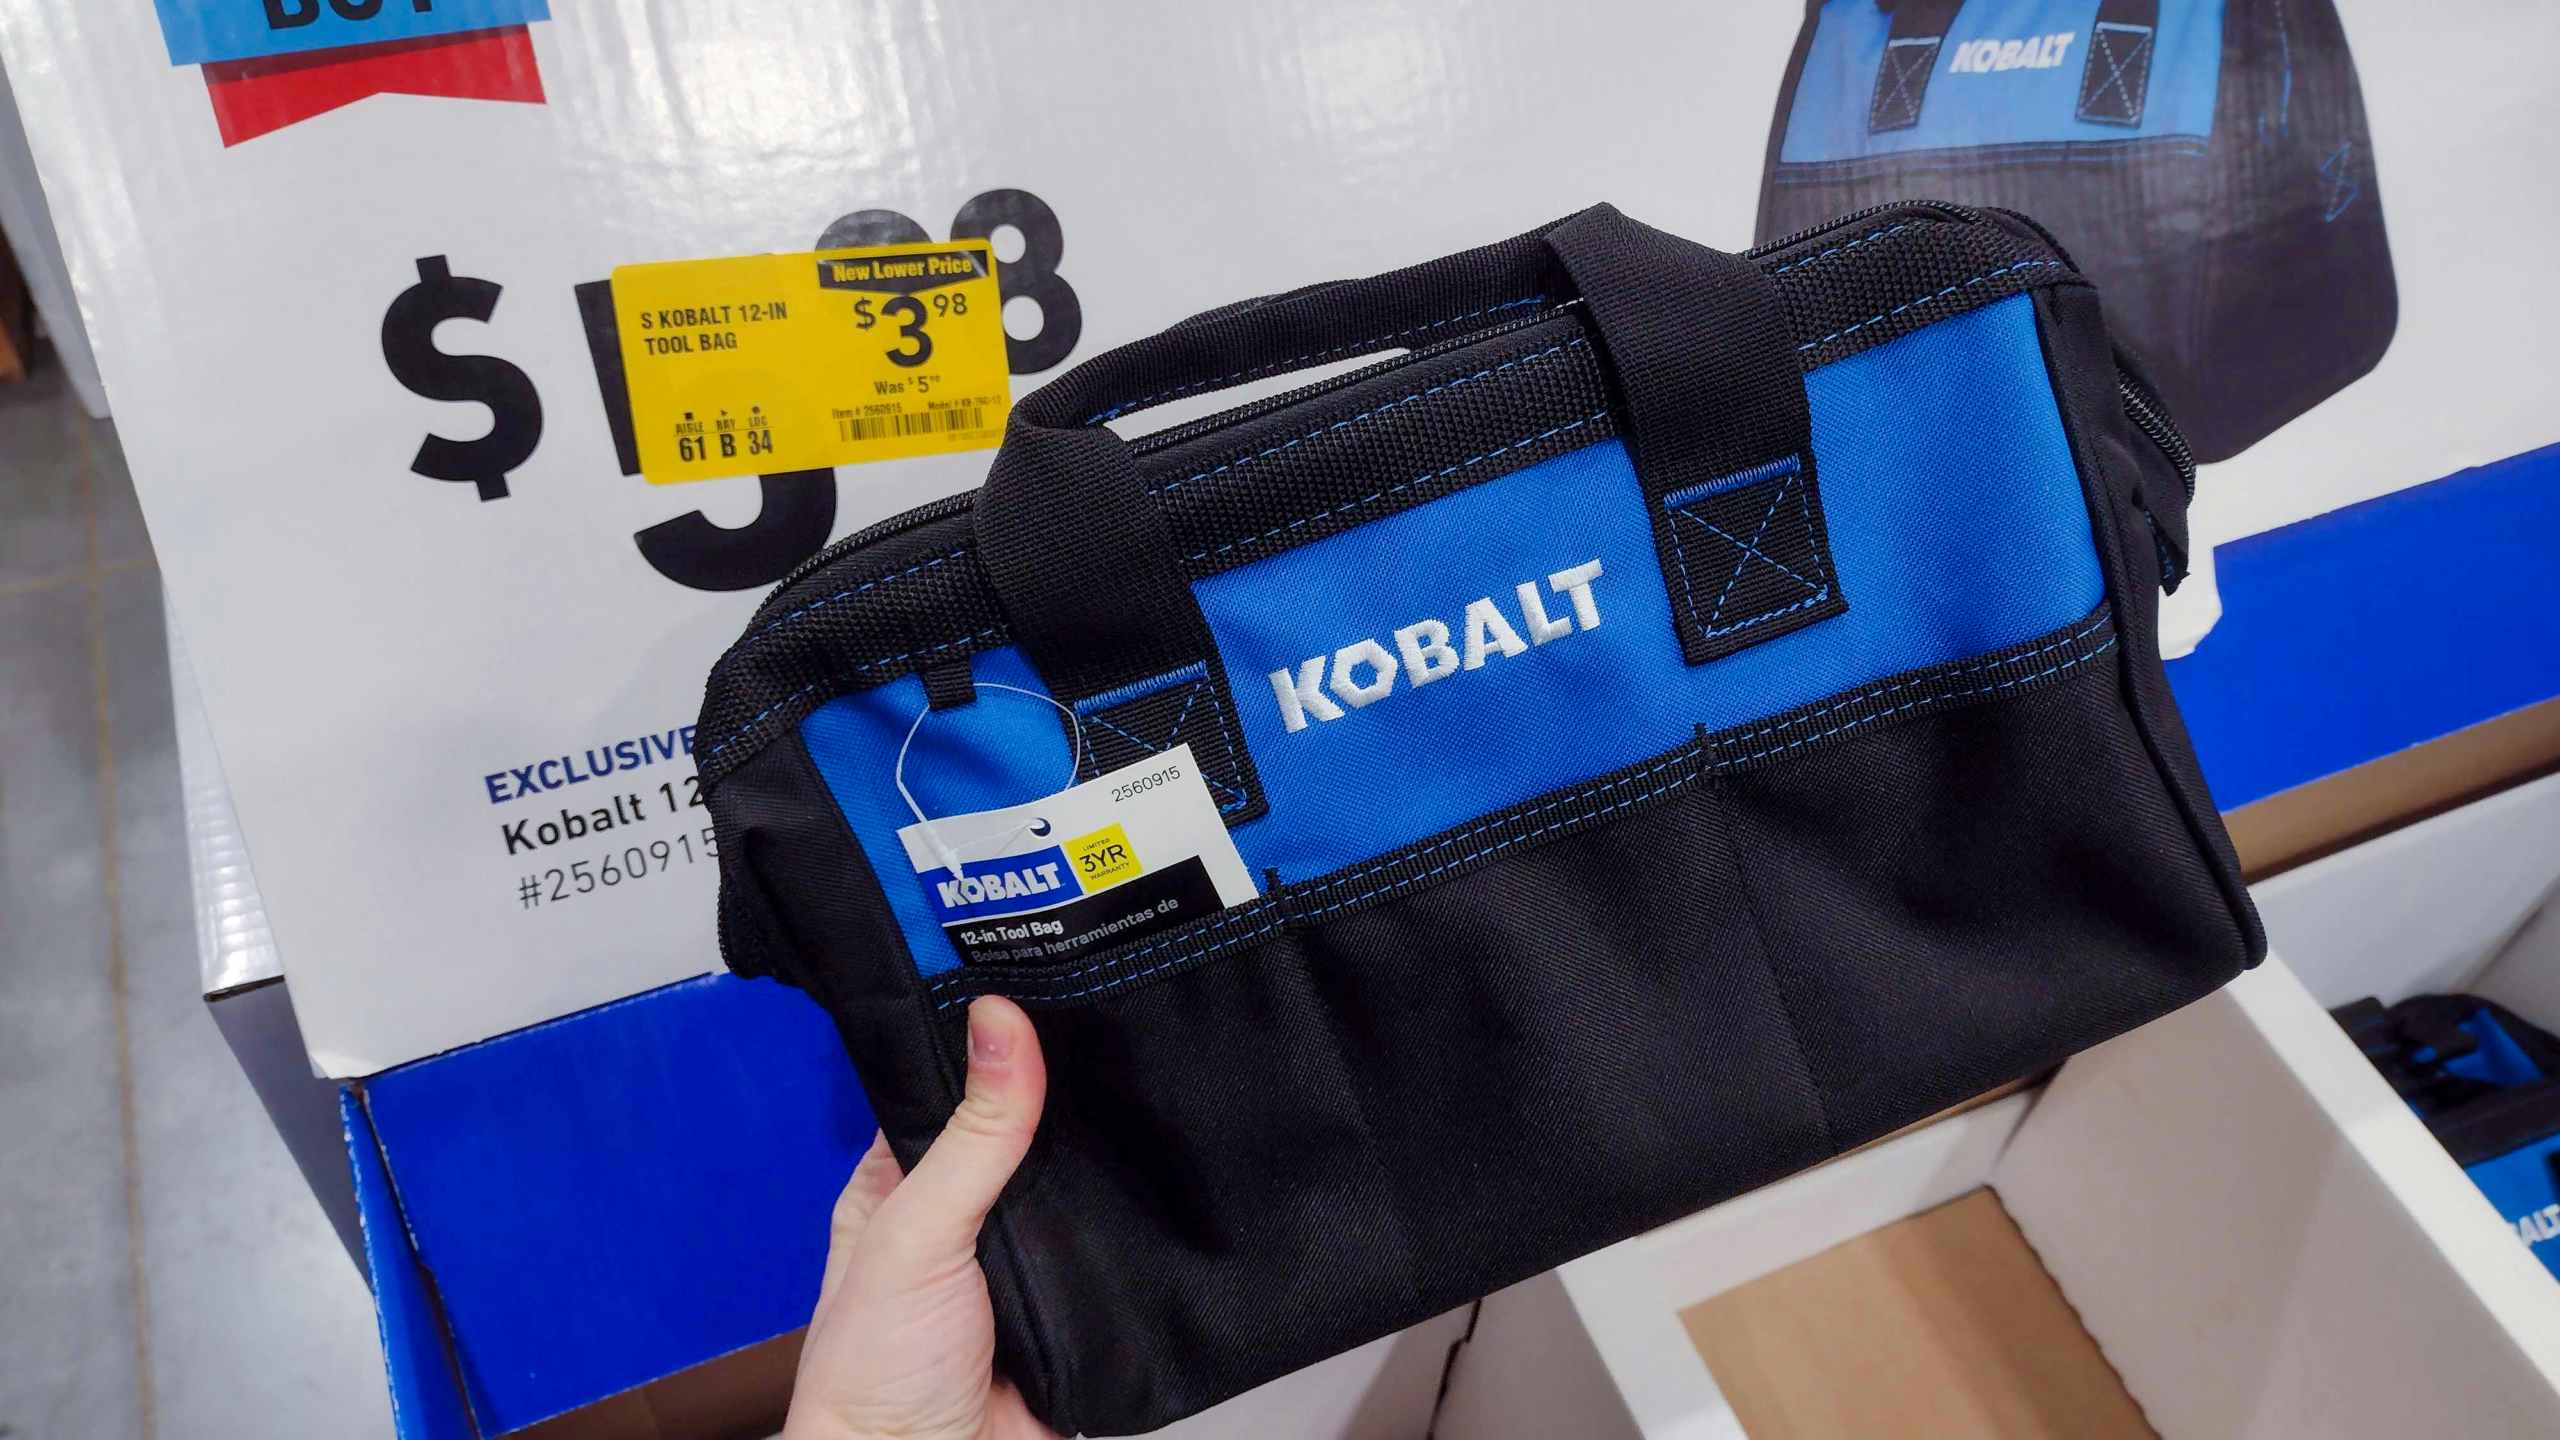 lowes year end clearance kobalt tool bag hand holding